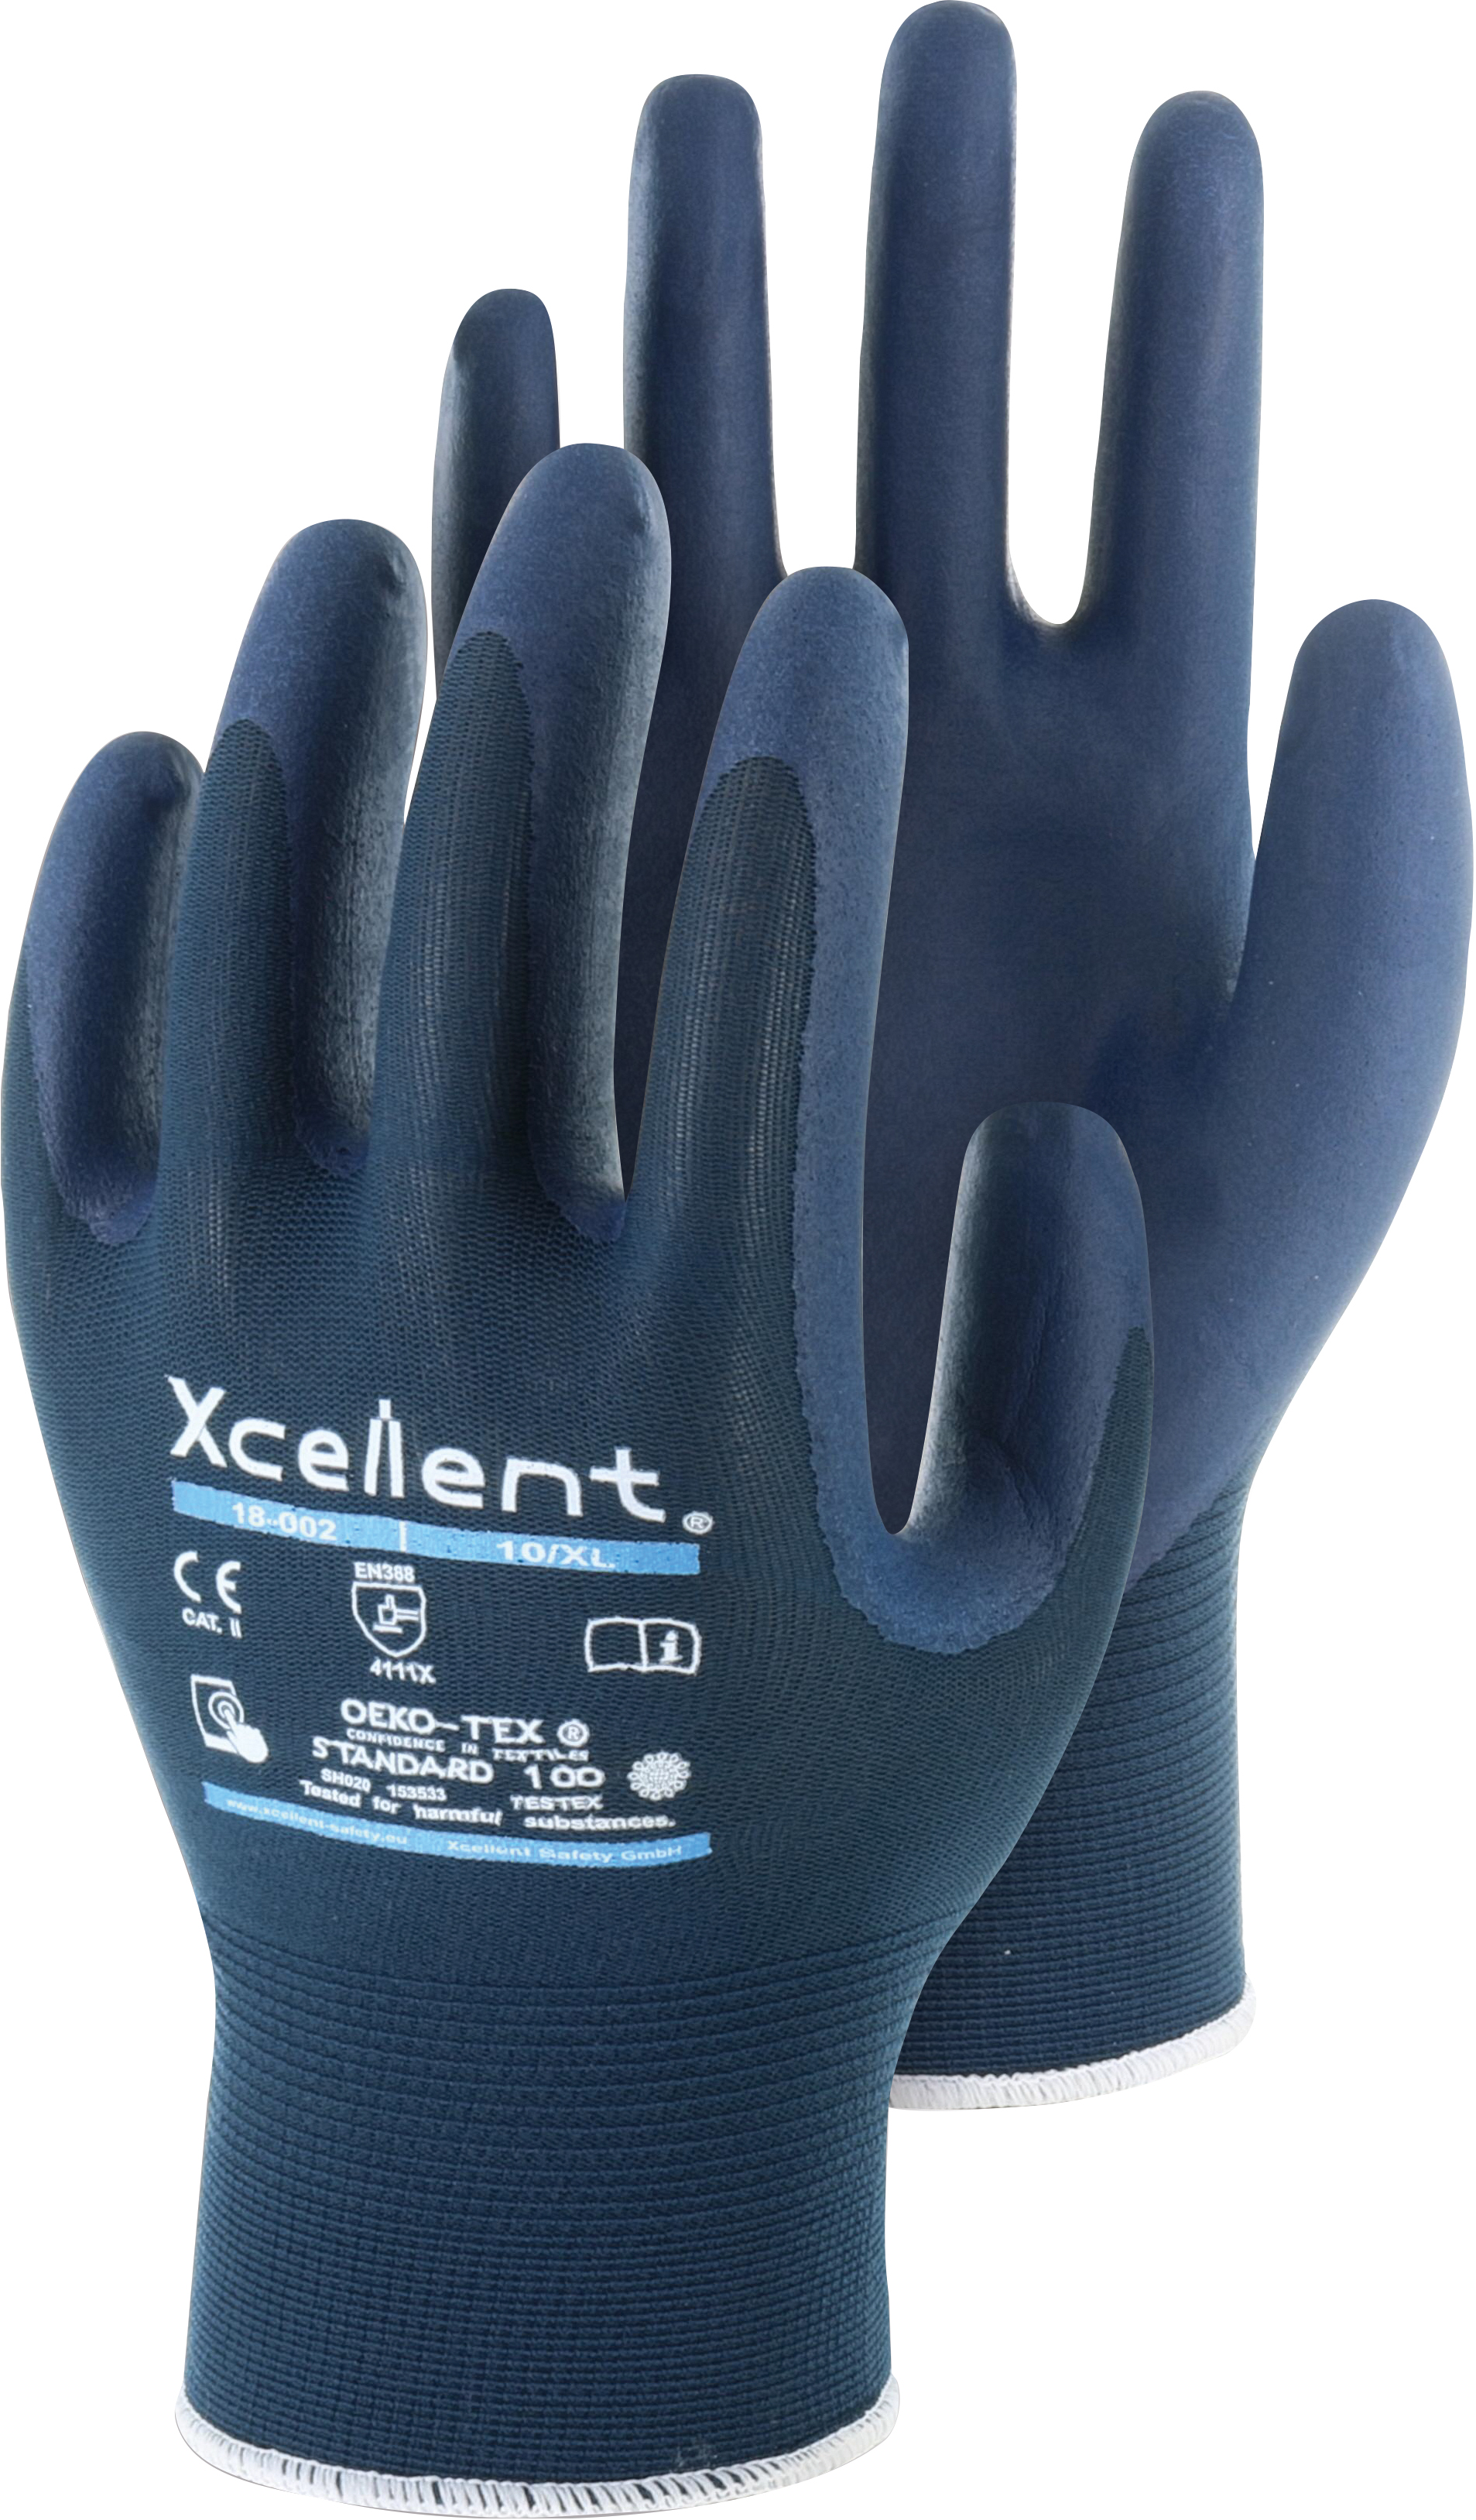 Triuso Xcellent XC18002 nitrile assembly gloves